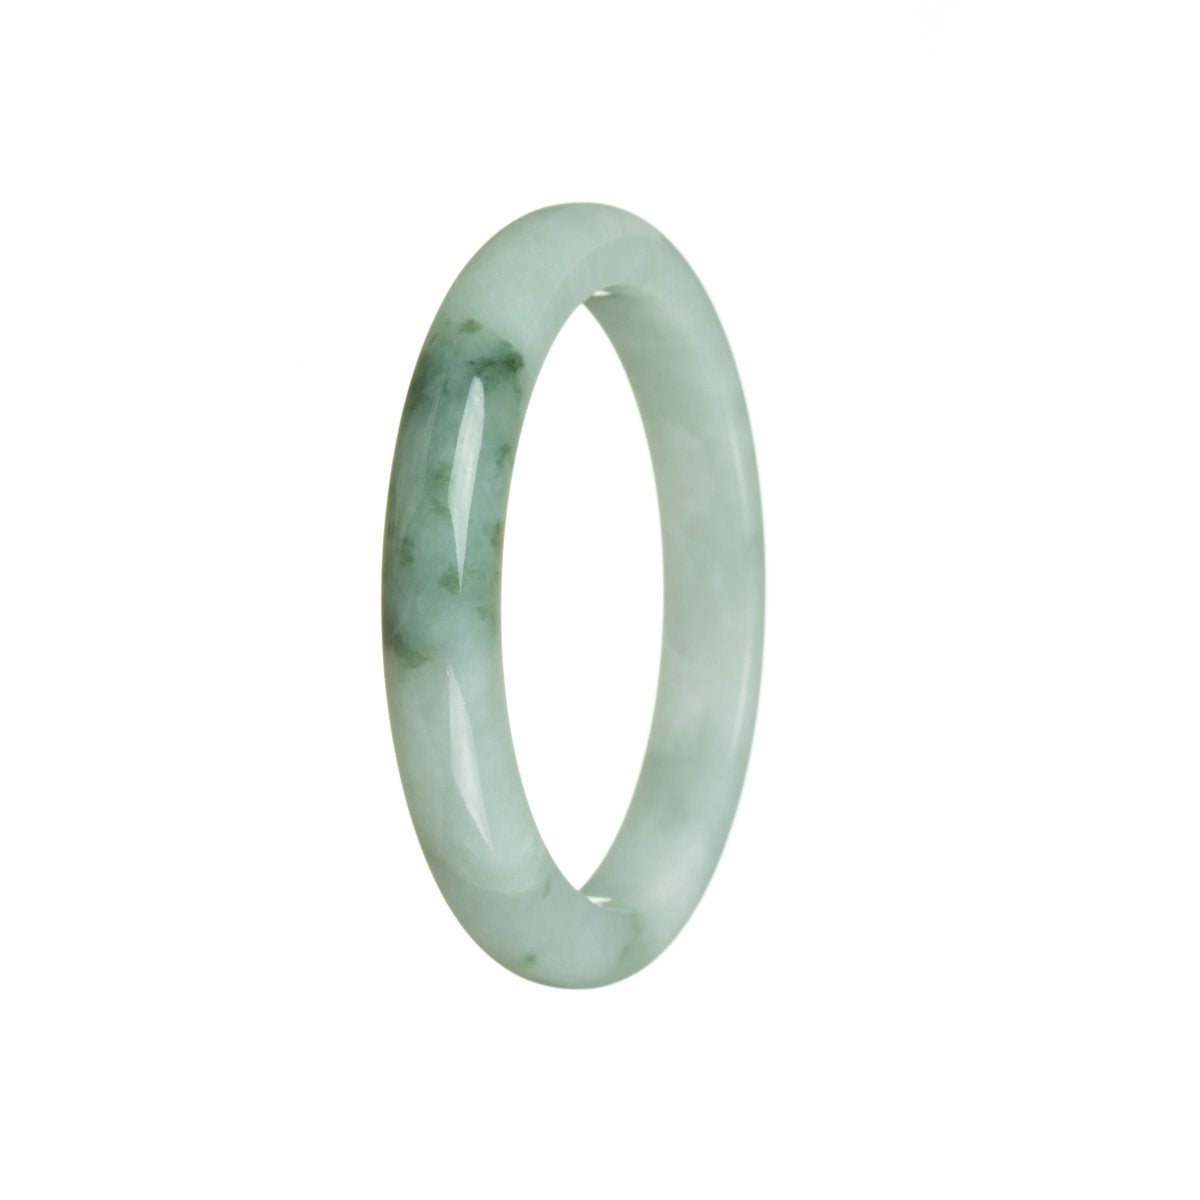 A pale green jade bangle with a certified Type A quality. The bangle has a semi-round shape and measures 55mm in diameter. It features a beautiful pattern on its surface. This bangle is from the brand MAYS™.